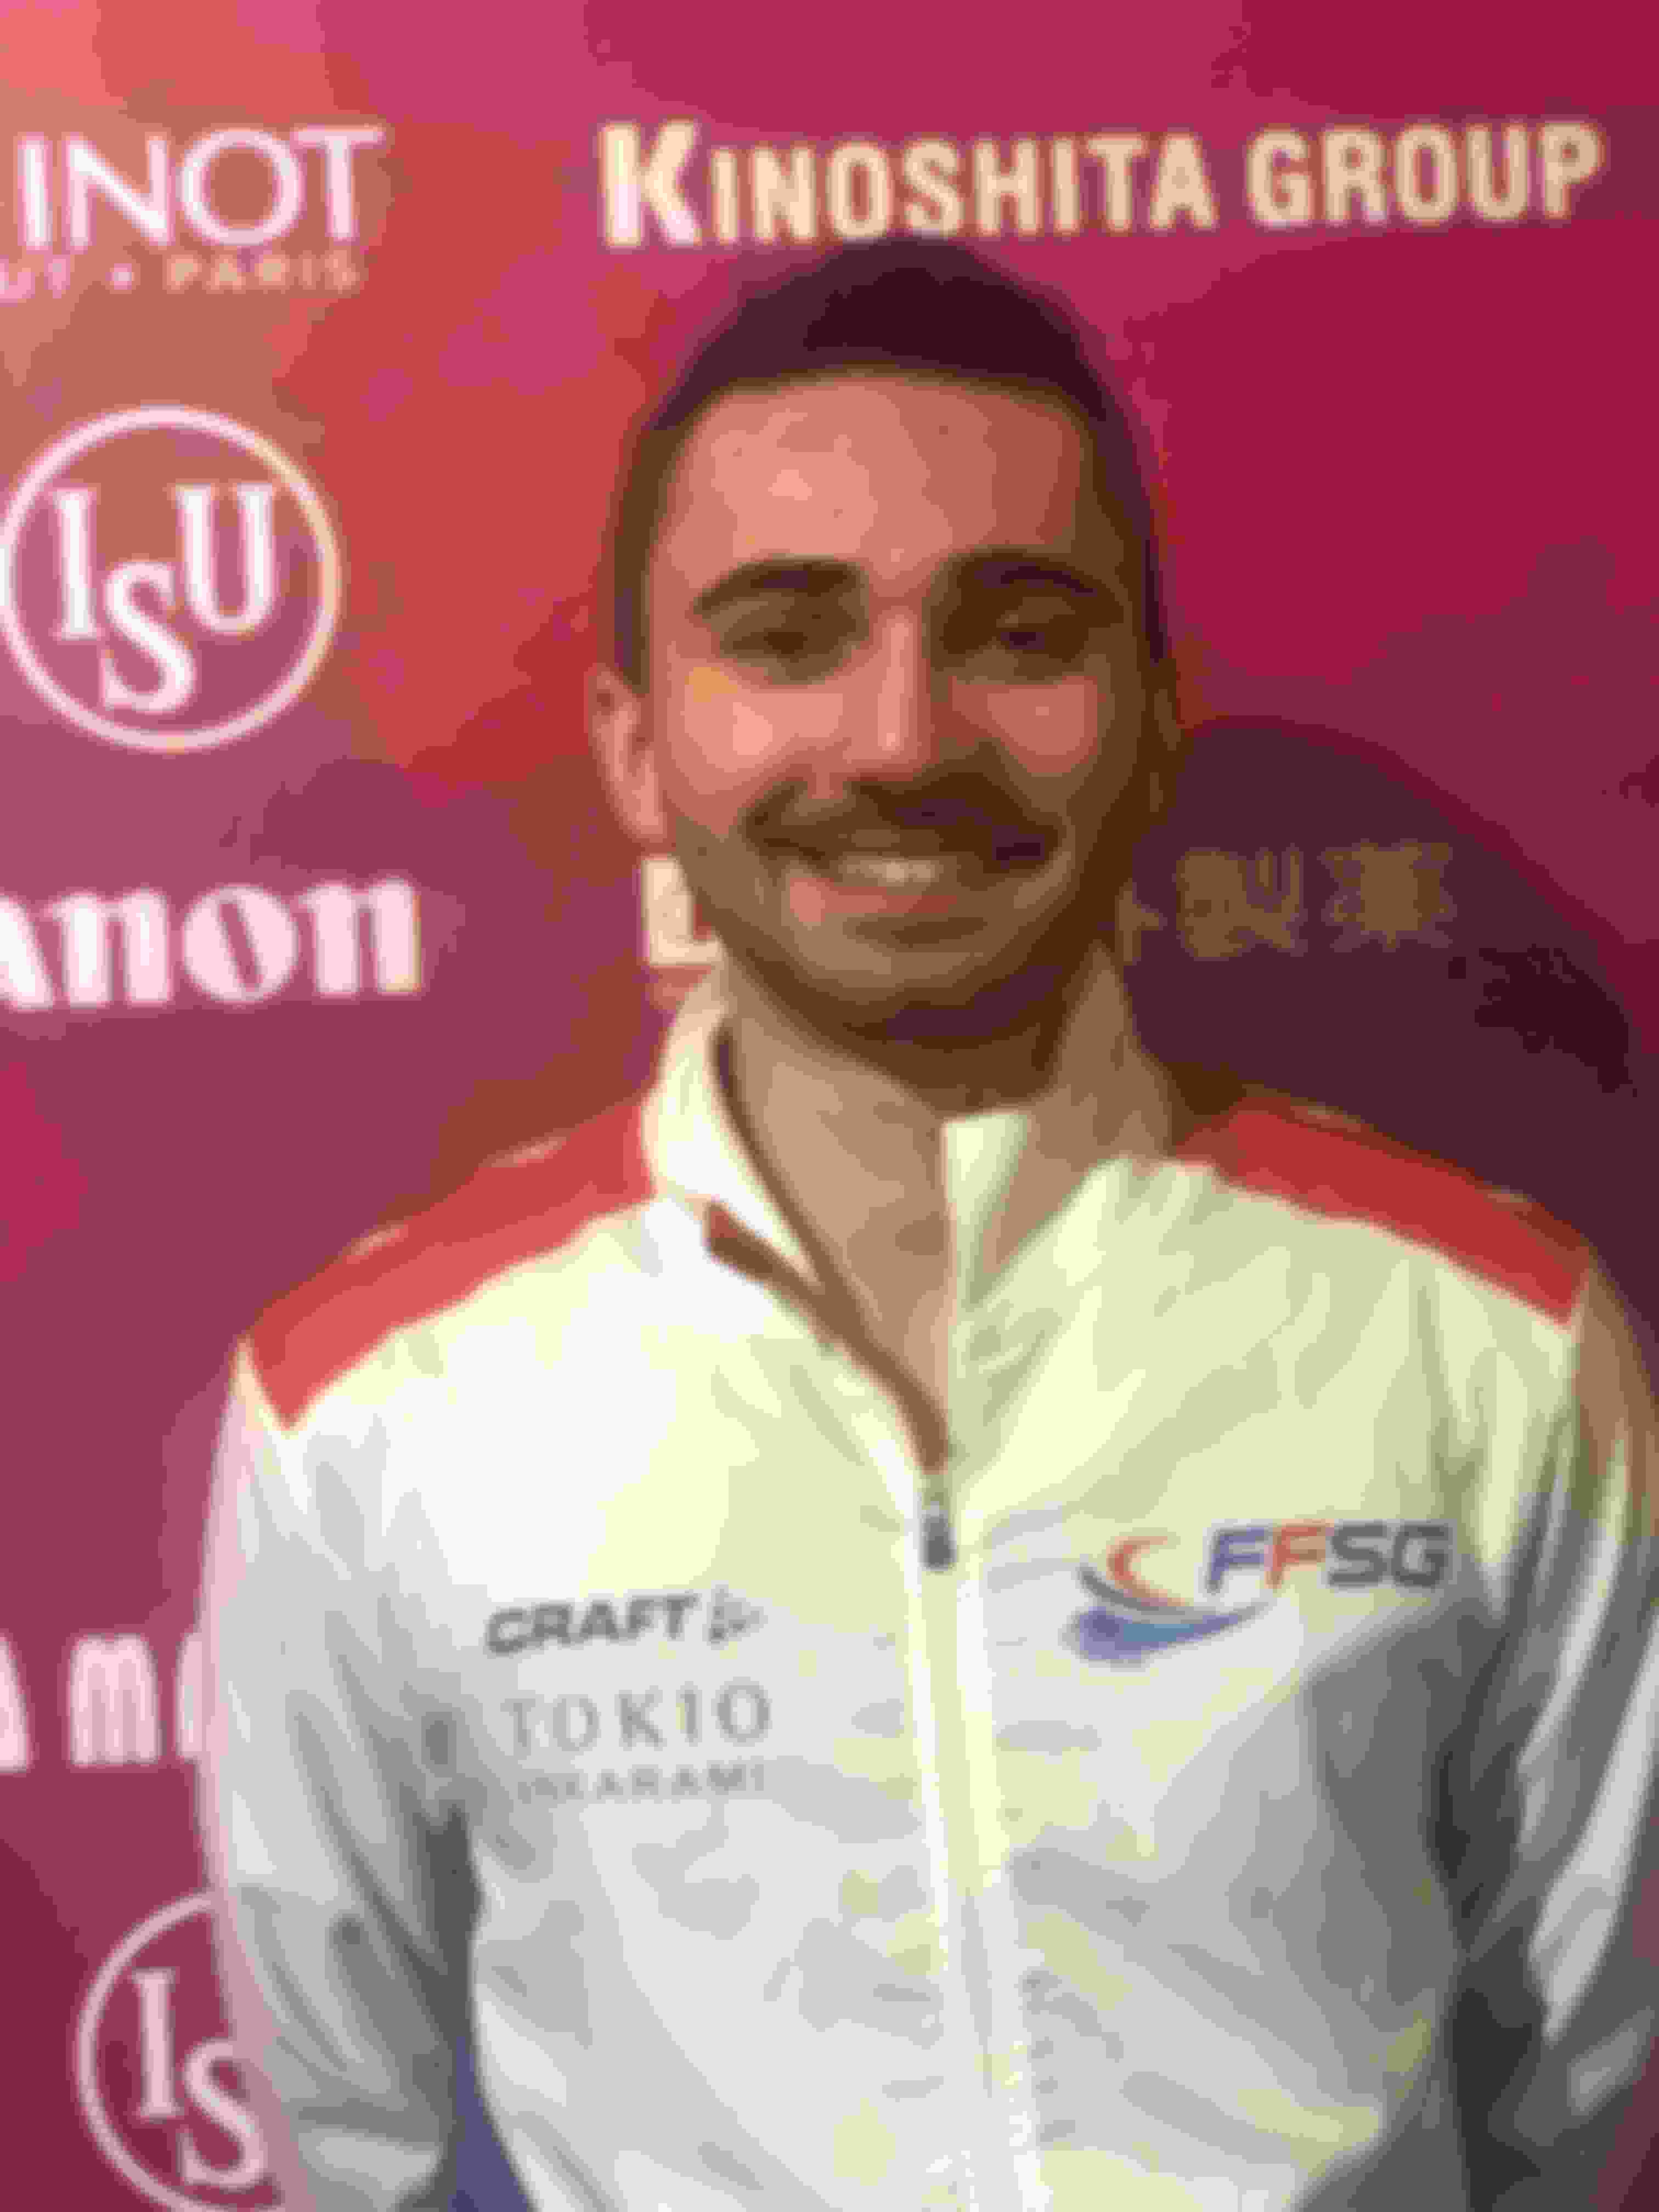 Kevin Aymoz after his personal best short program at the 2019 Grand Prix Final in Turin